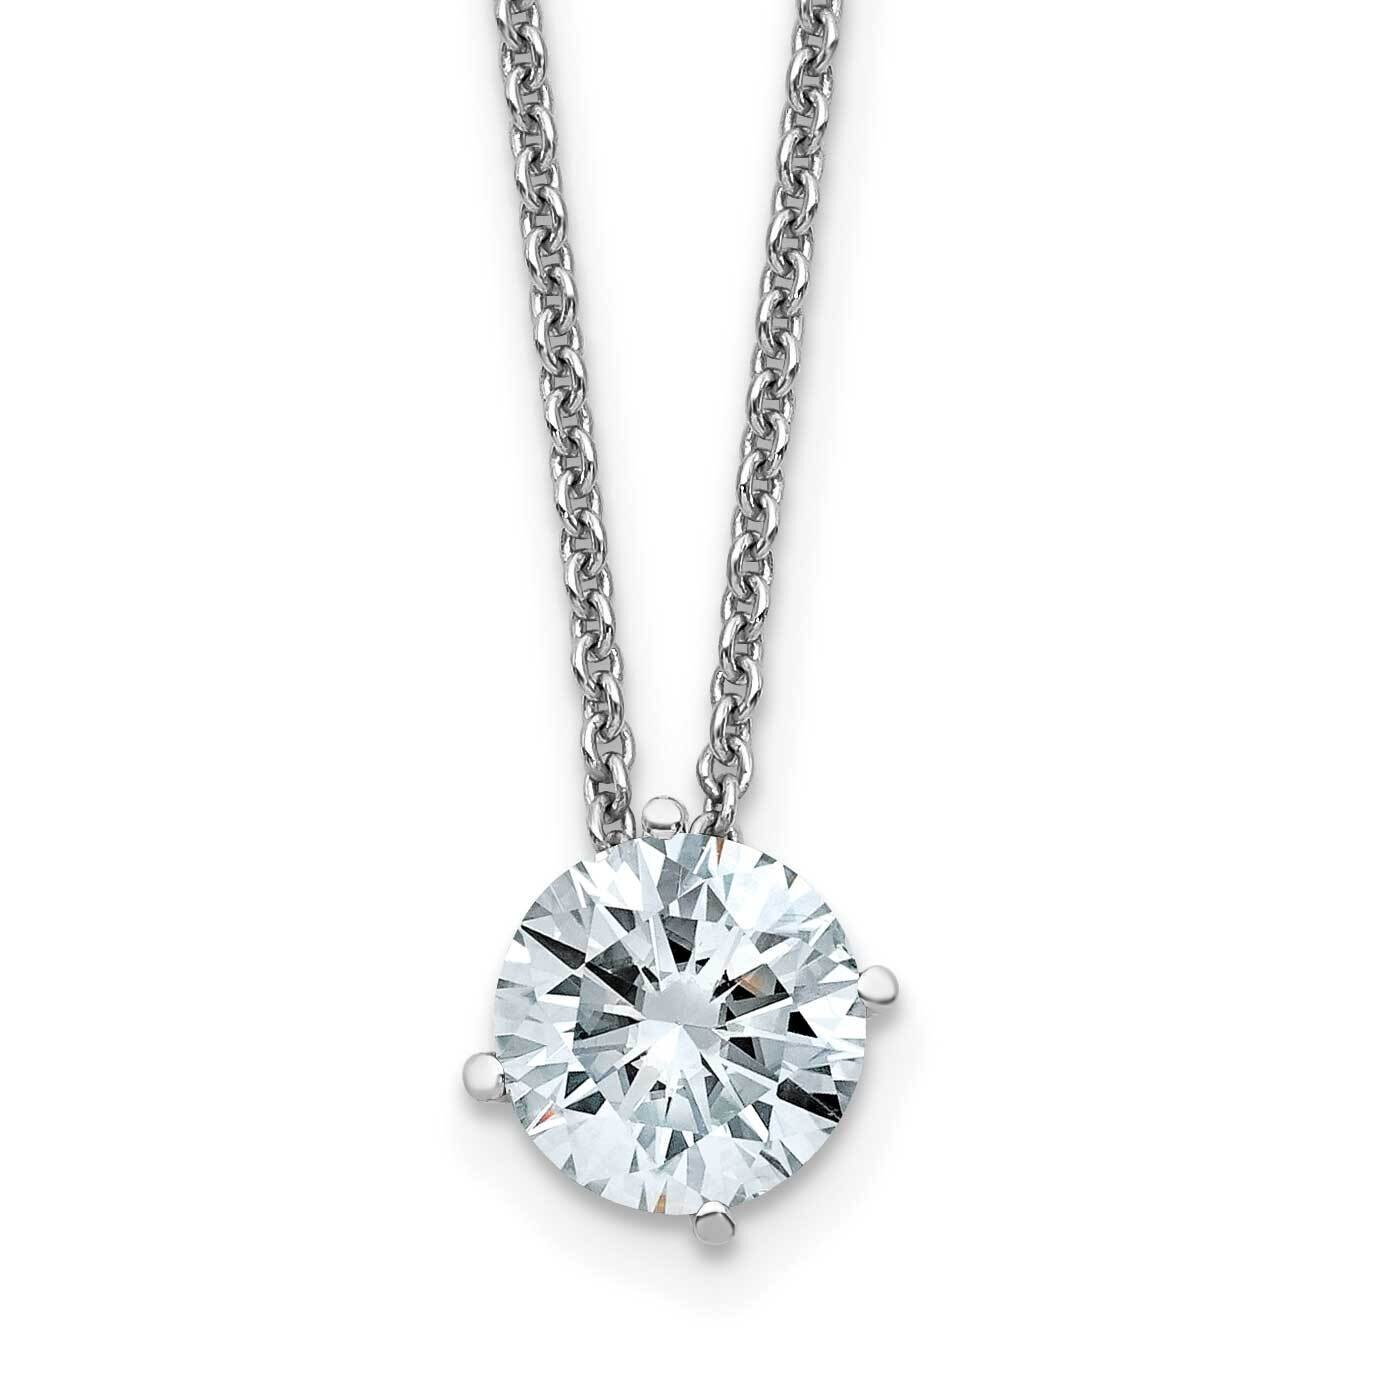 1ct. 6.5mm Round D E F Pure Light Moissanite Solitaire Necklace 14k White Gold WG113-21MP